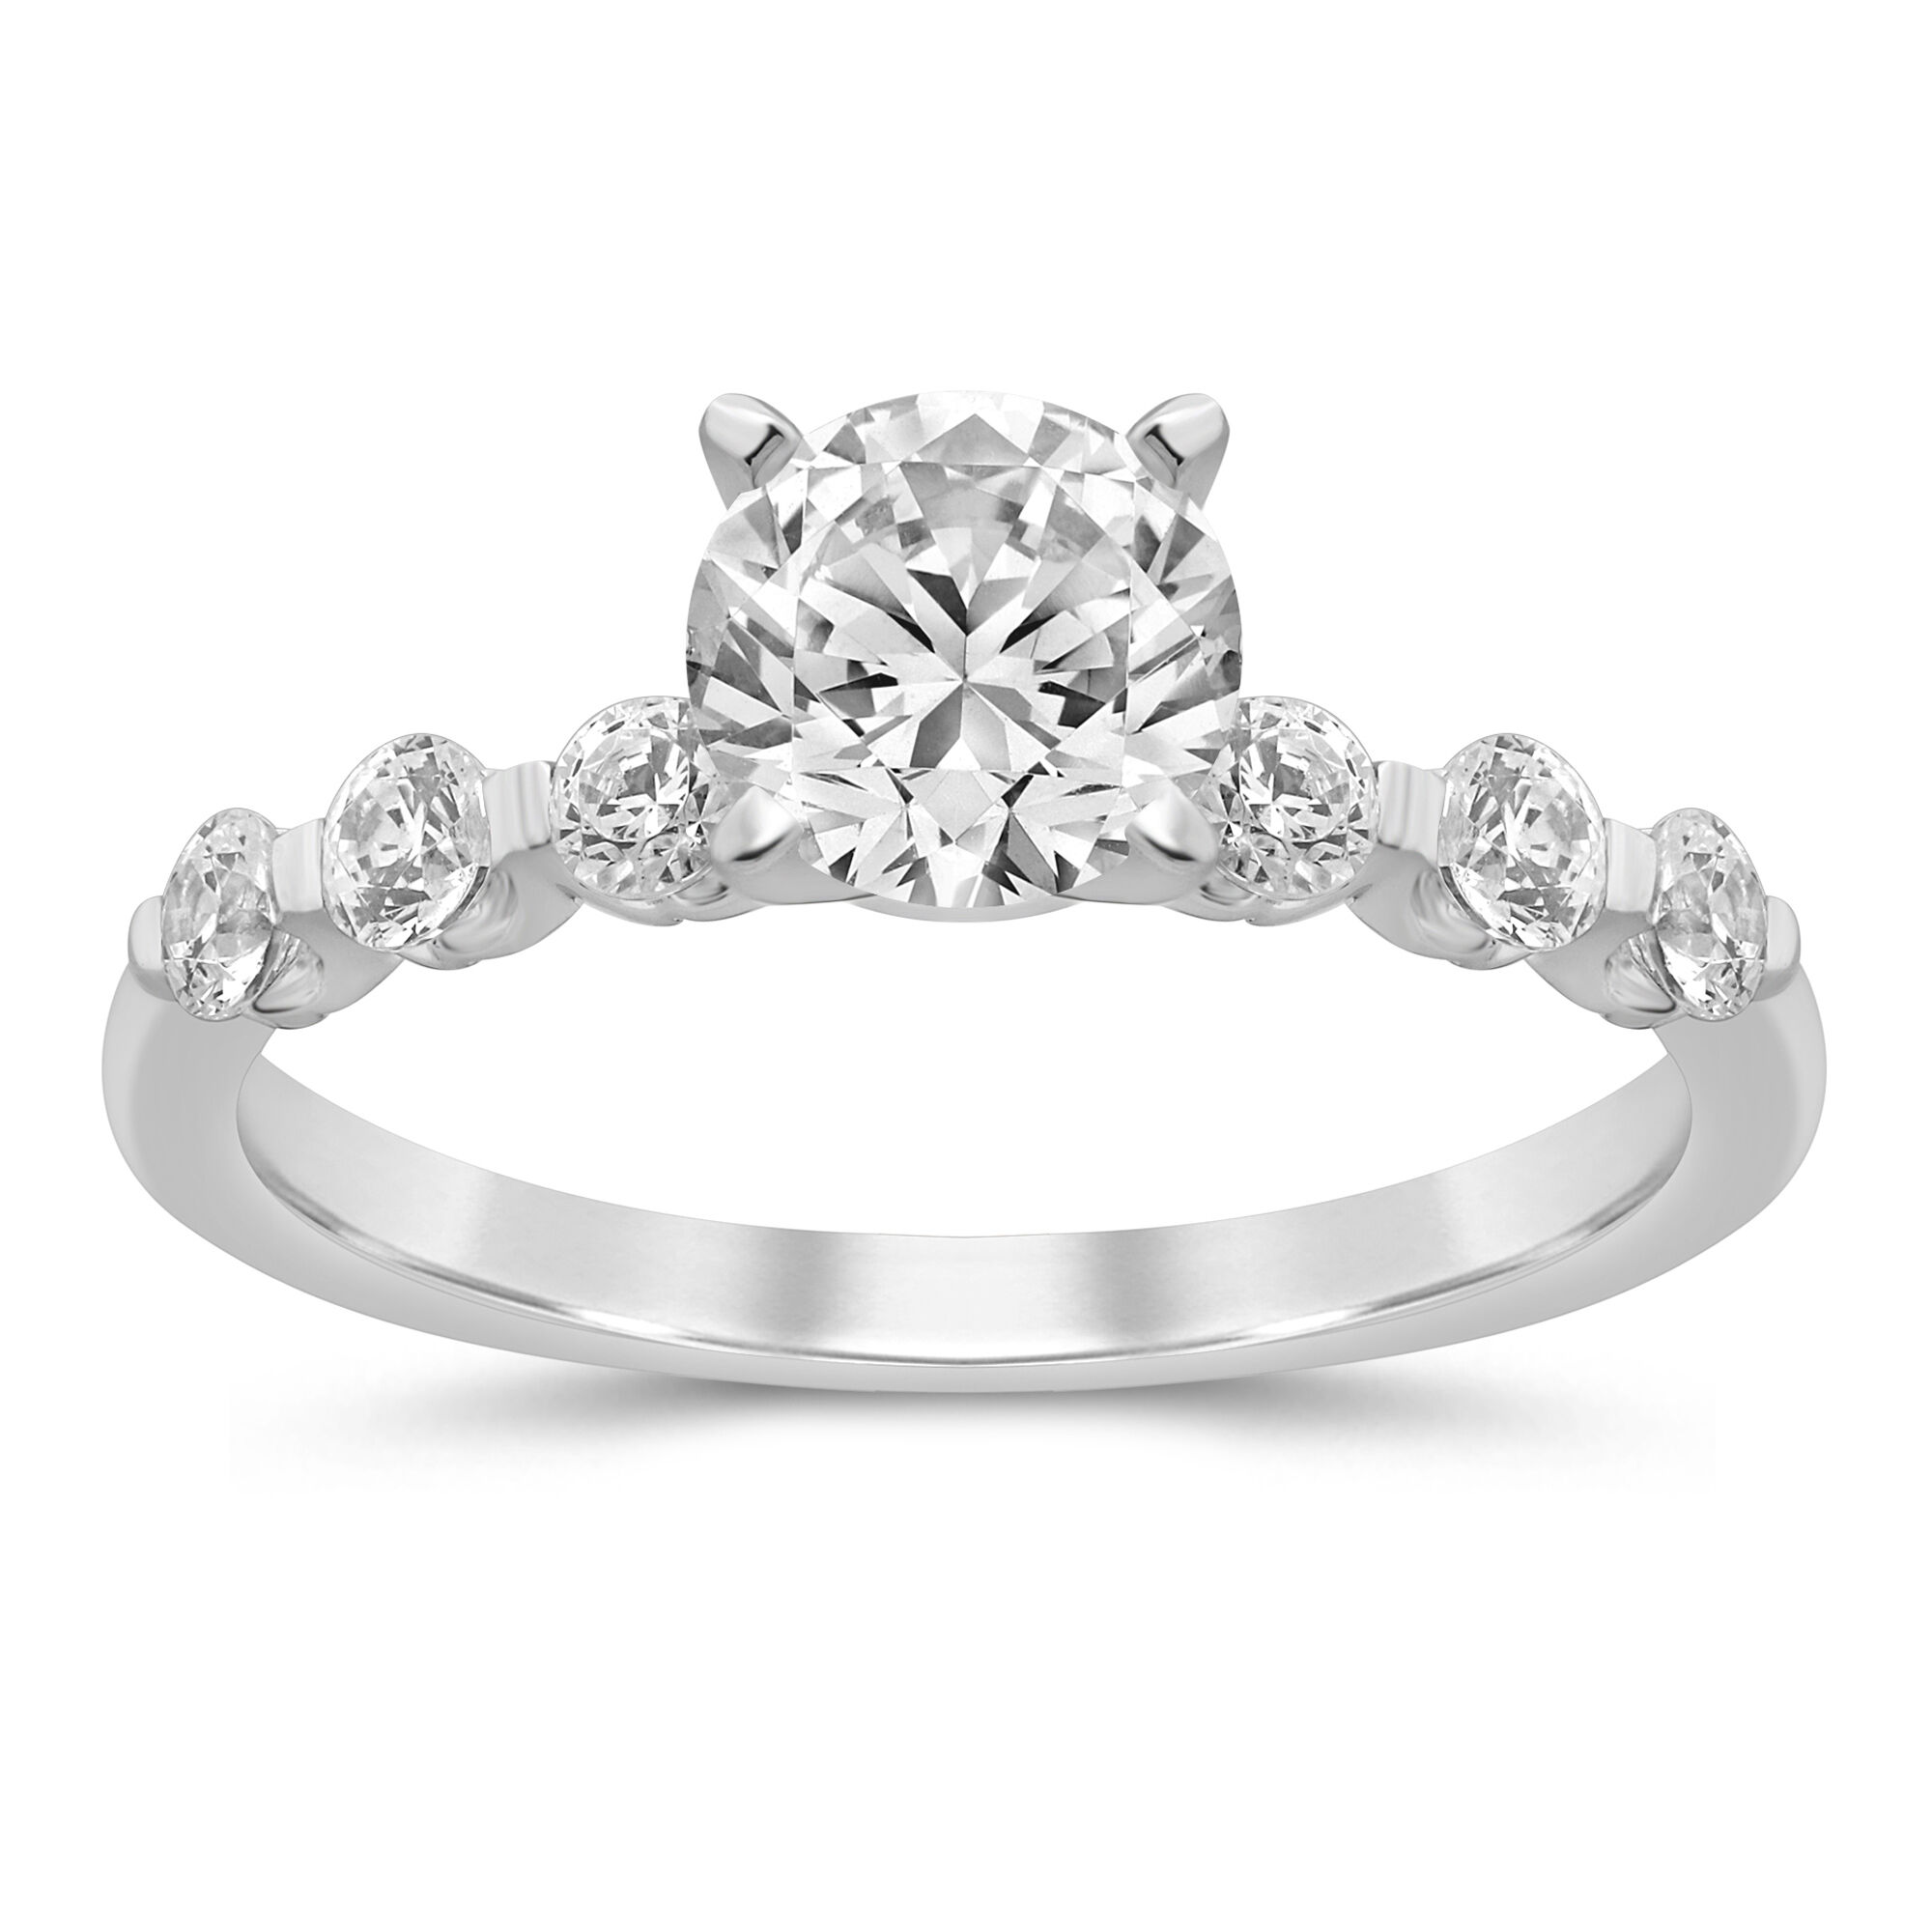 14K WHITE GOLD NEW AIRE CATHEDRAL SOLITAIRE ENGAGEMENT RING SETTING (S